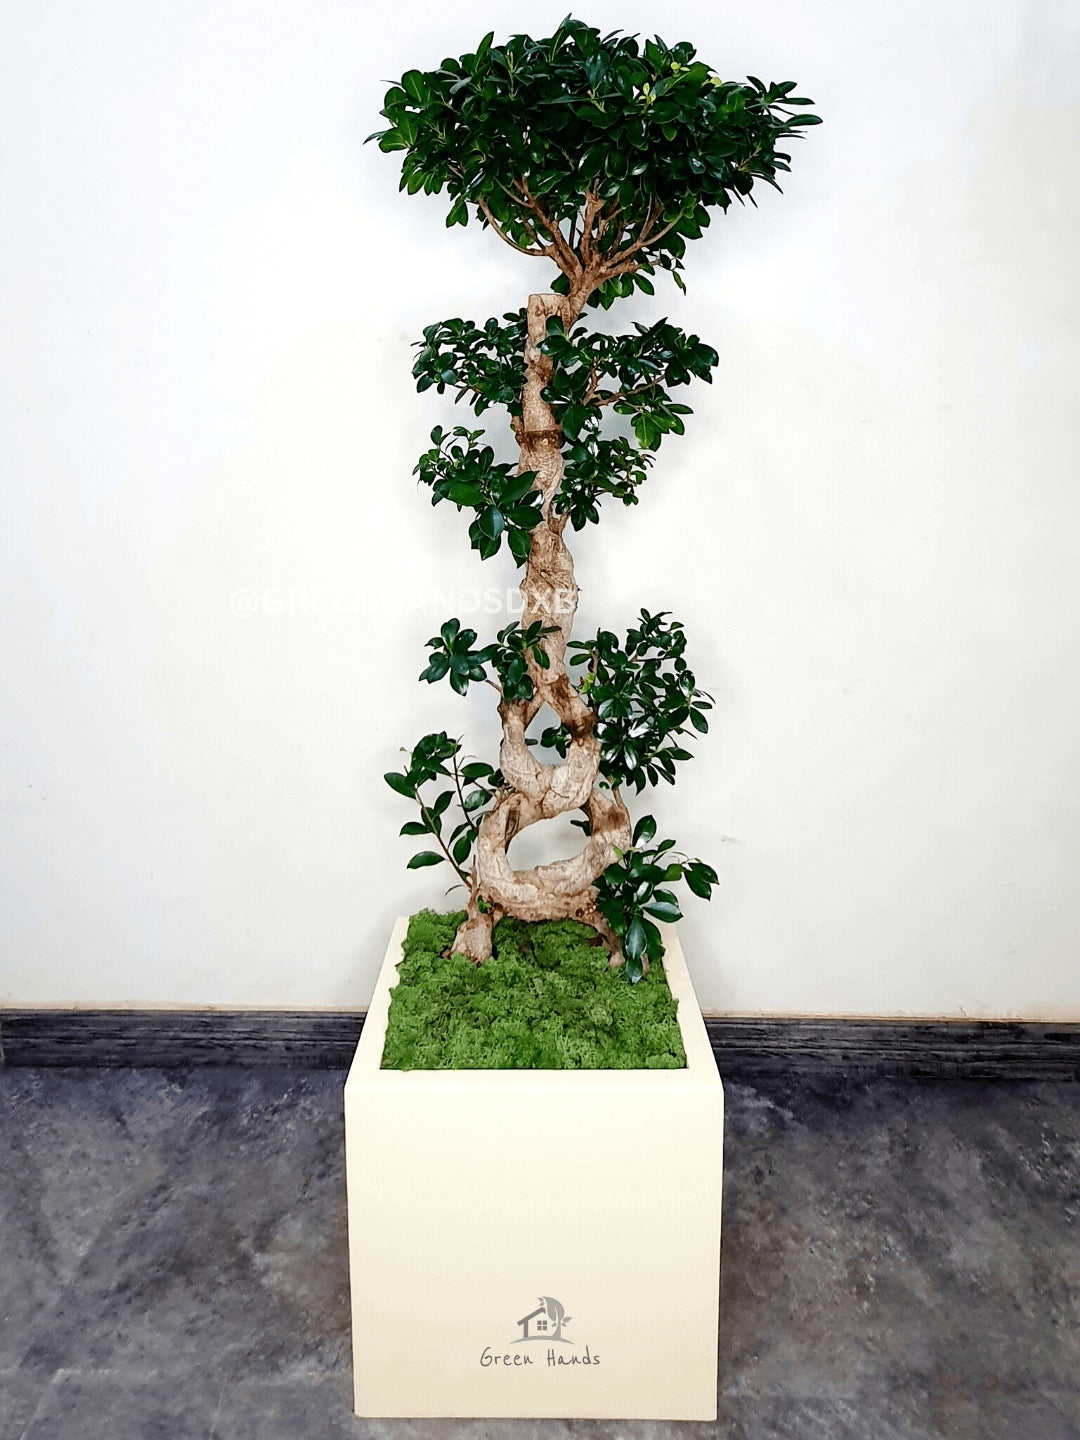 XL 8-Shaped Bonsai Tree: Make a Statement with This Masterpiece Indoor Plant